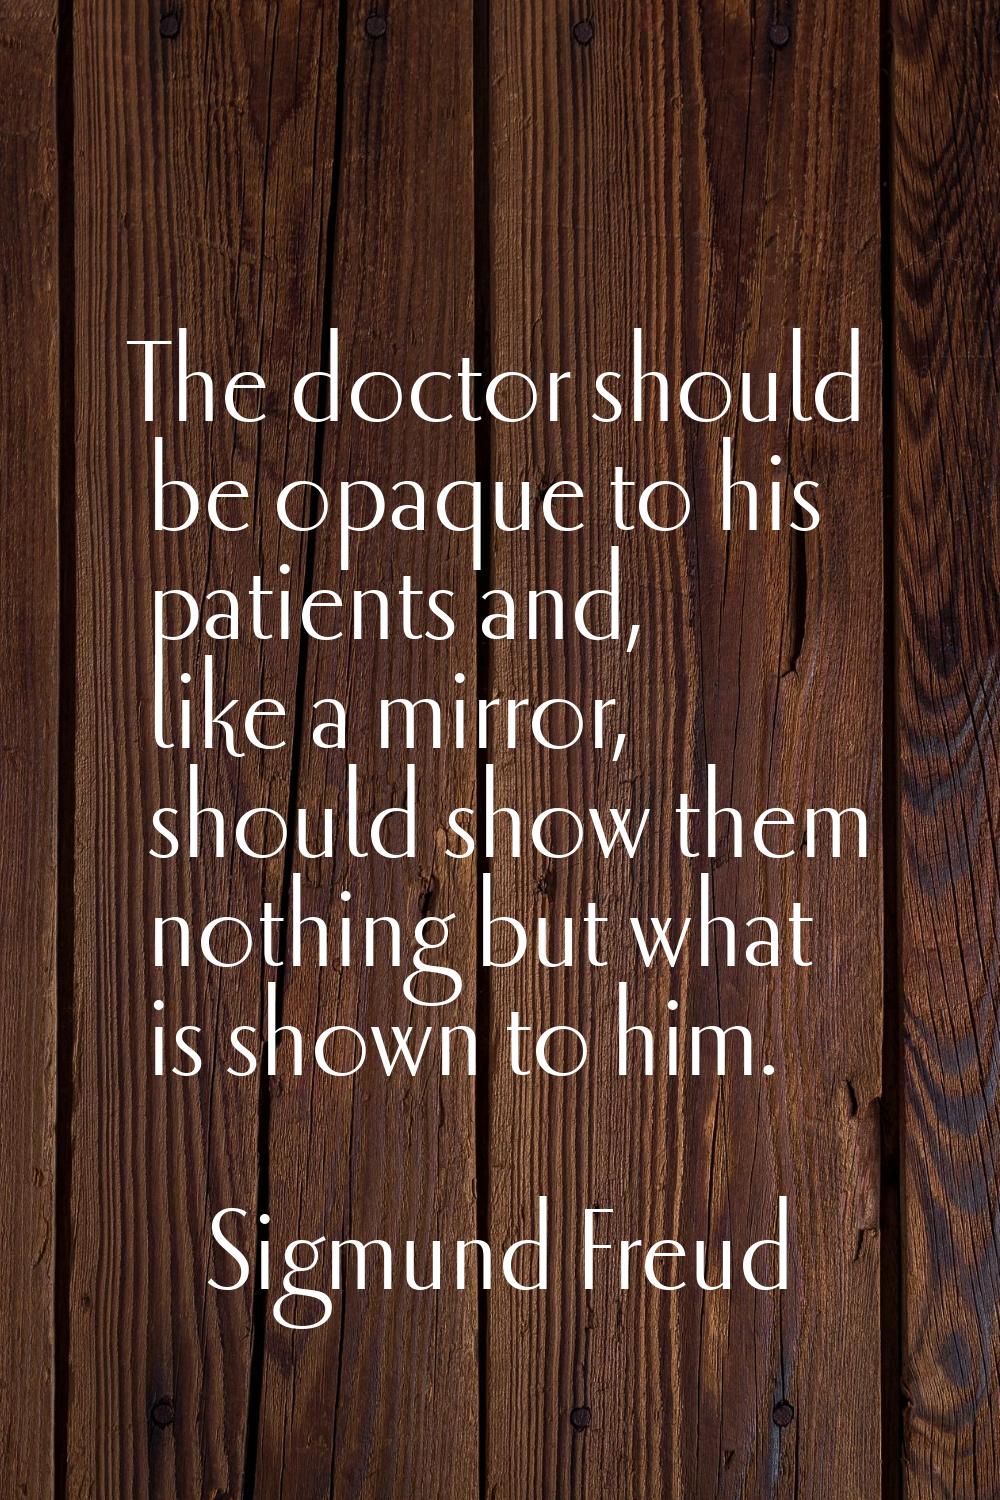 The doctor should be opaque to his patients and, like a mirror, should show them nothing but what i